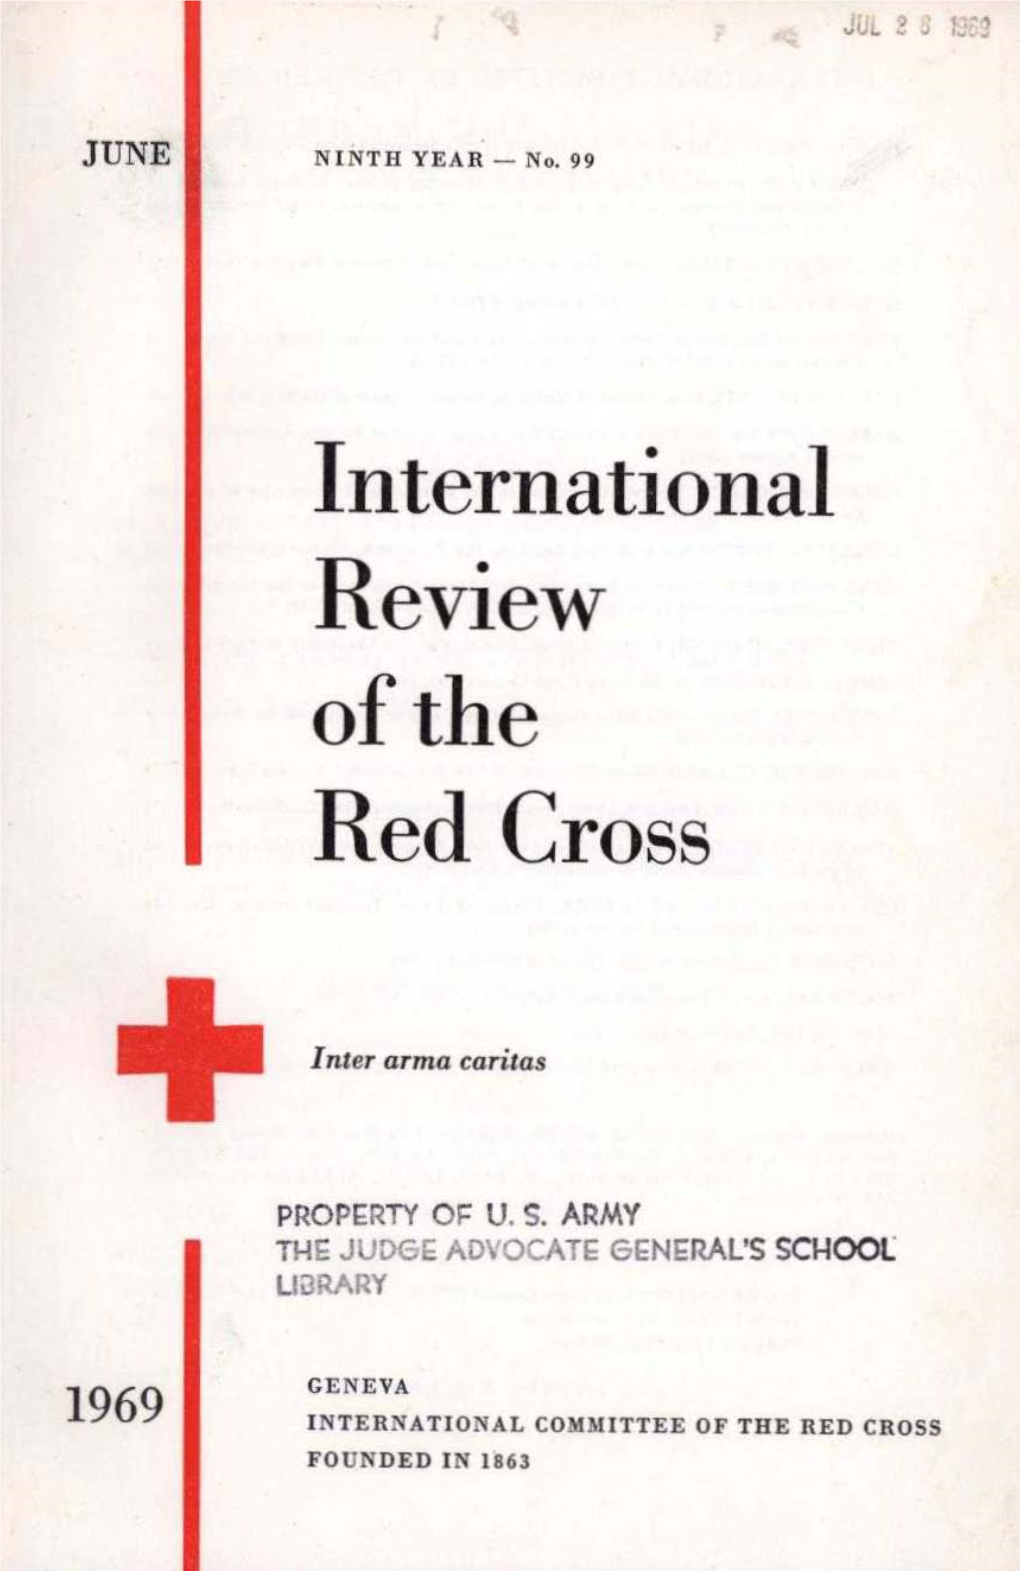 International Review of the Red Cross, June 1969, Ninth Year